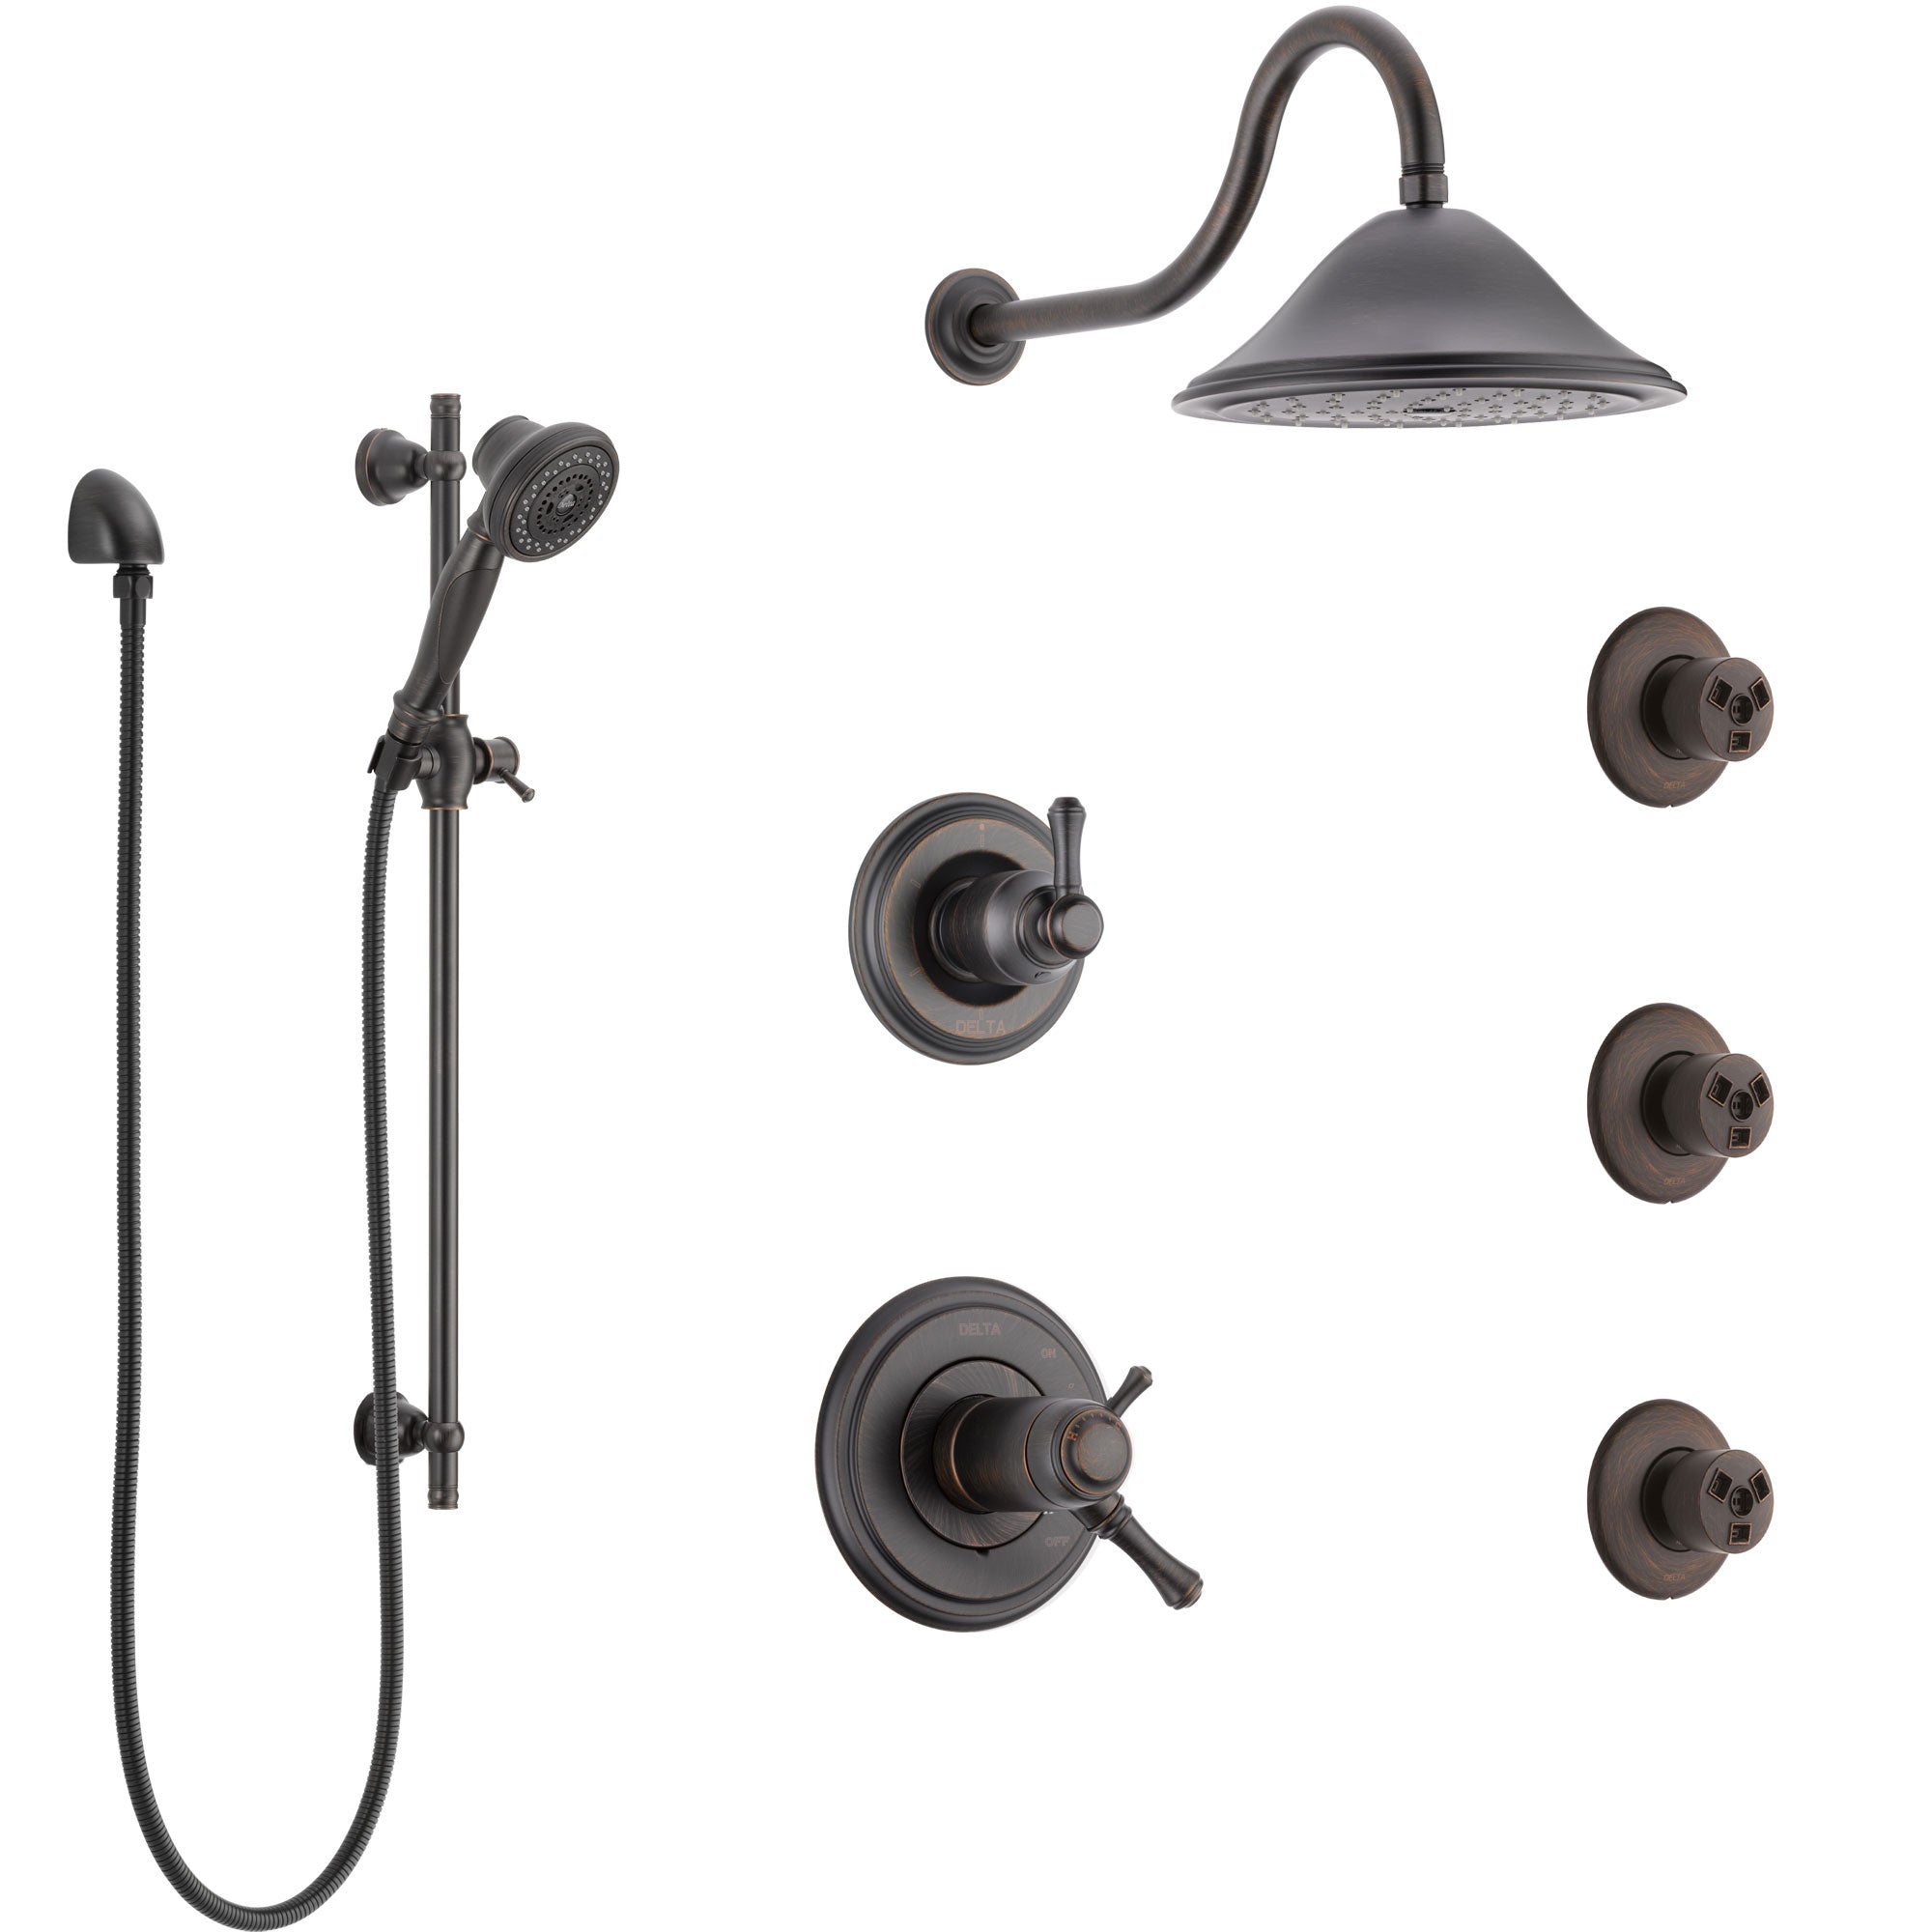 Delta Cassidy Venetian Bronze Shower System with Dual Thermostatic Control, Diverter, Showerhead, 3 Body Sprays, and Hand Shower SS17T2971RB3